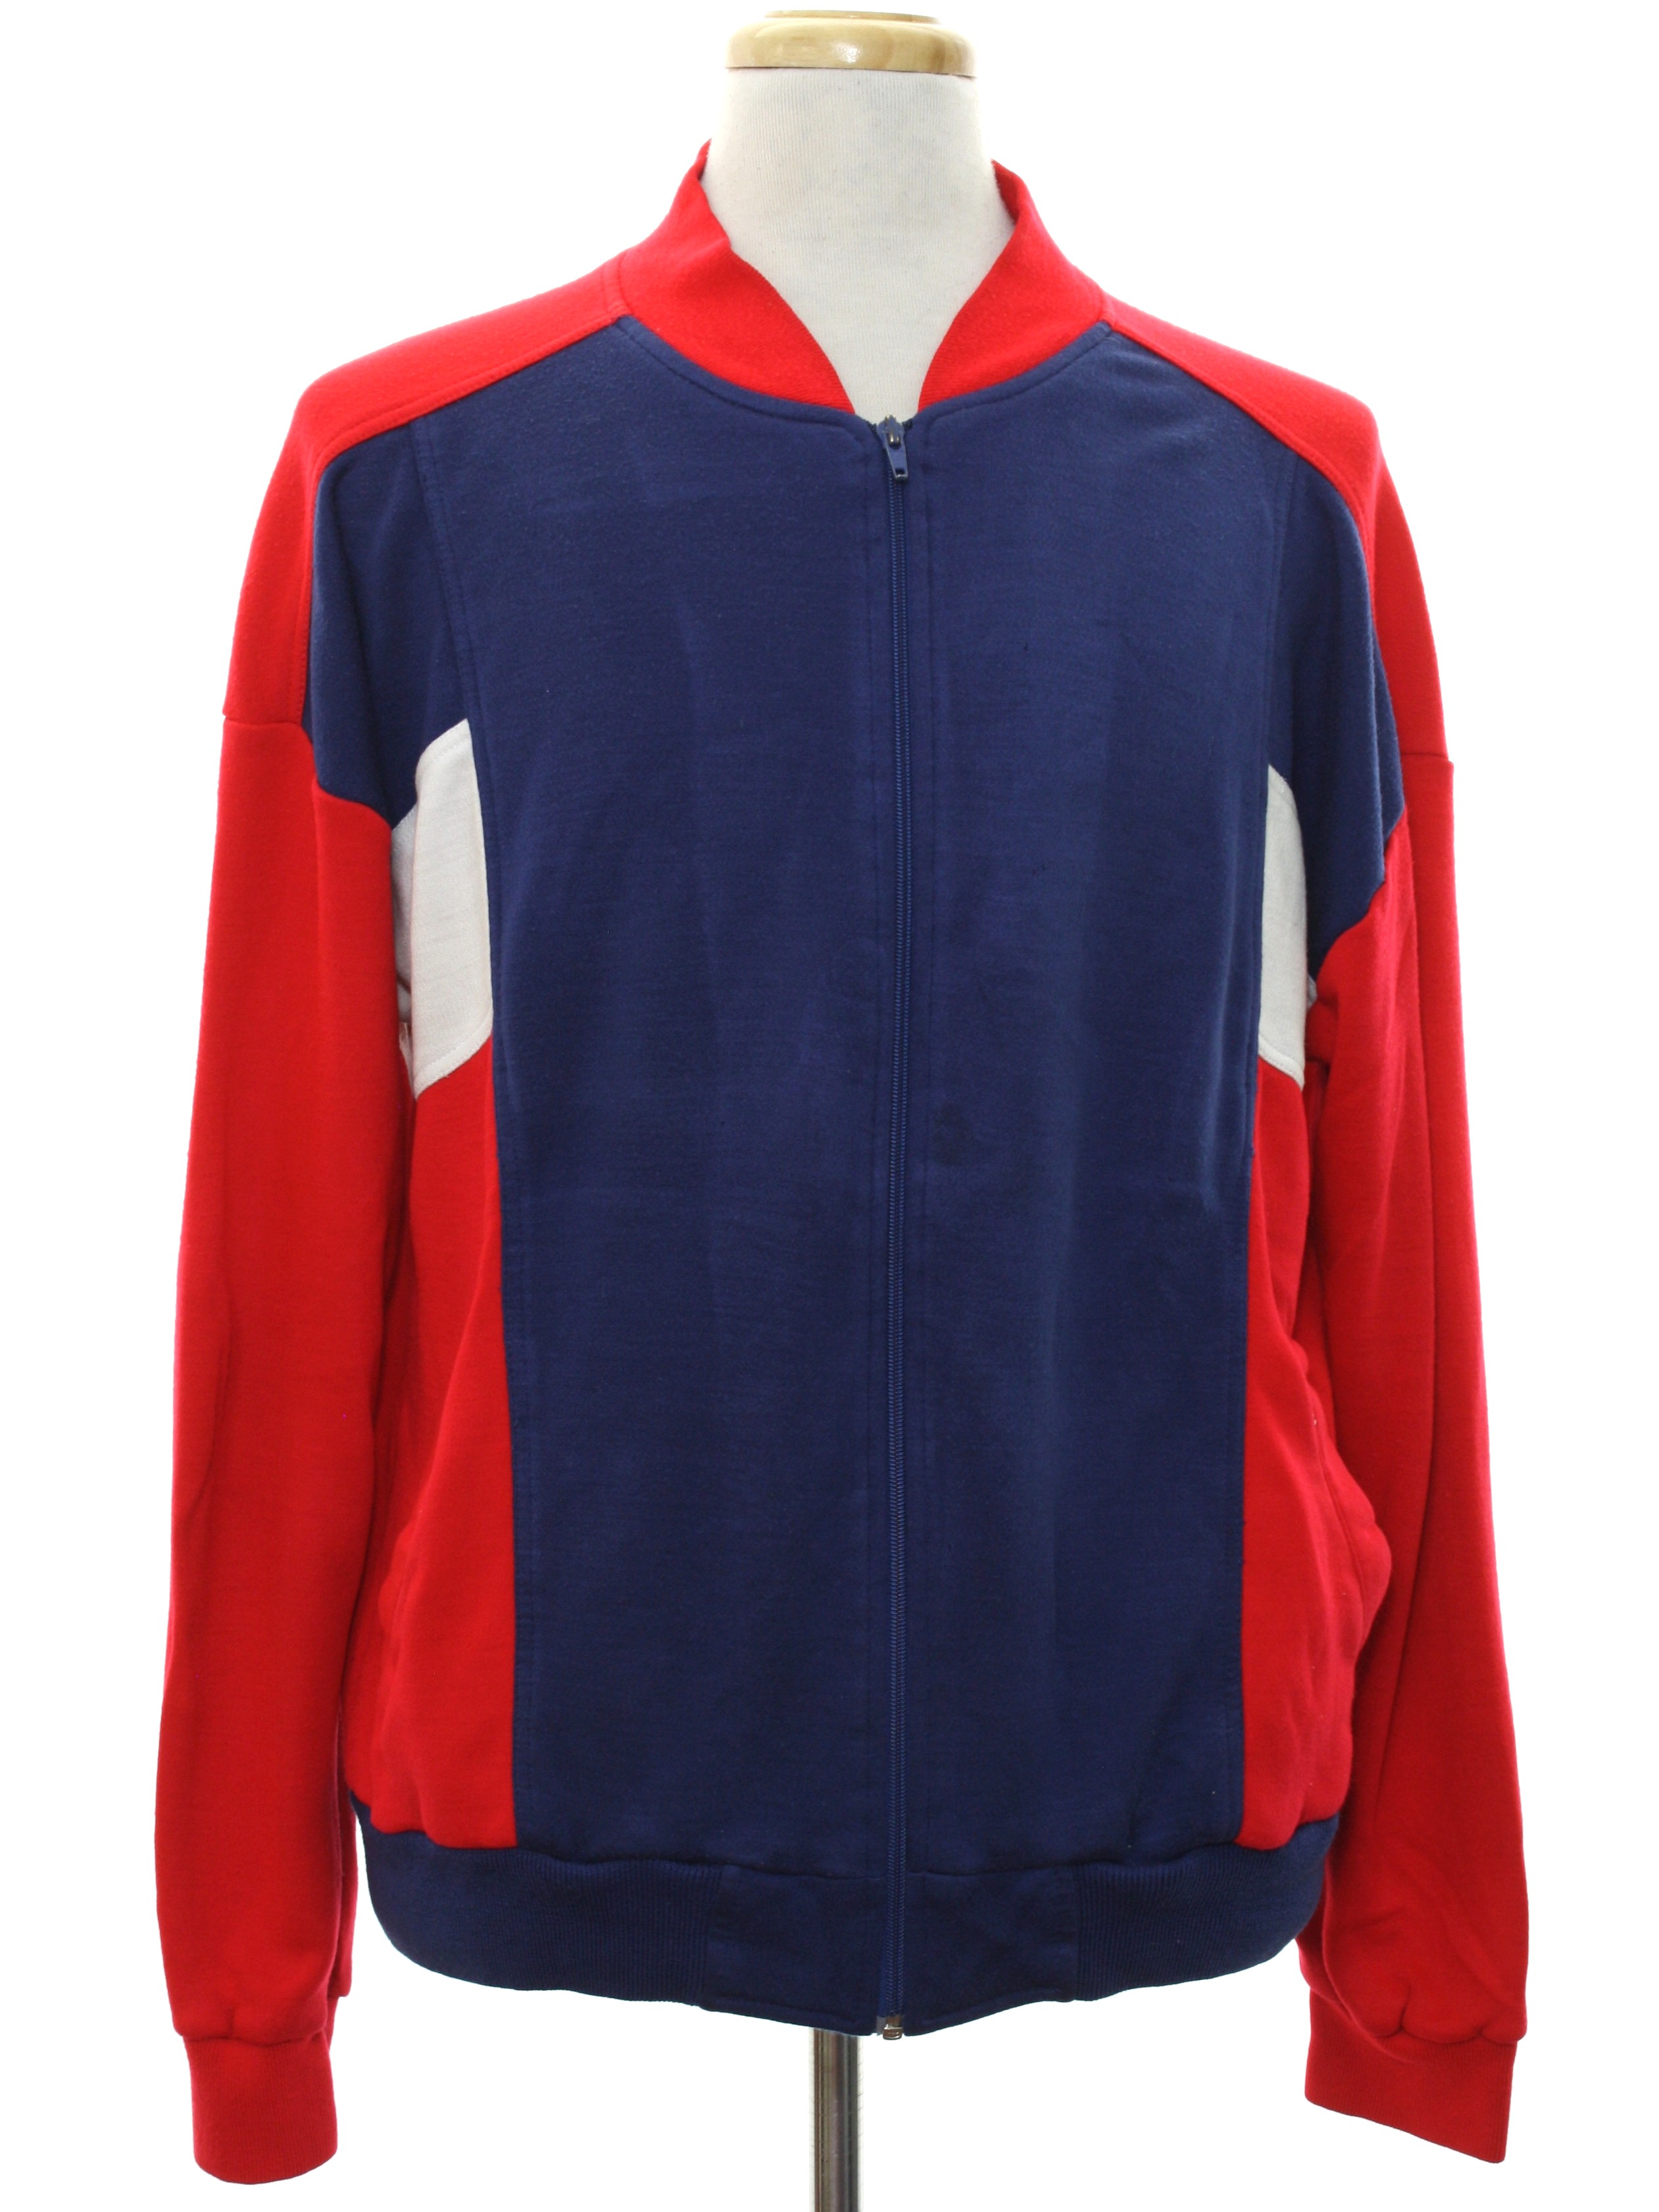 Vintage 1980's Jacket: 80s -Oshmans Sportswear- Mens red, navy blue and ...